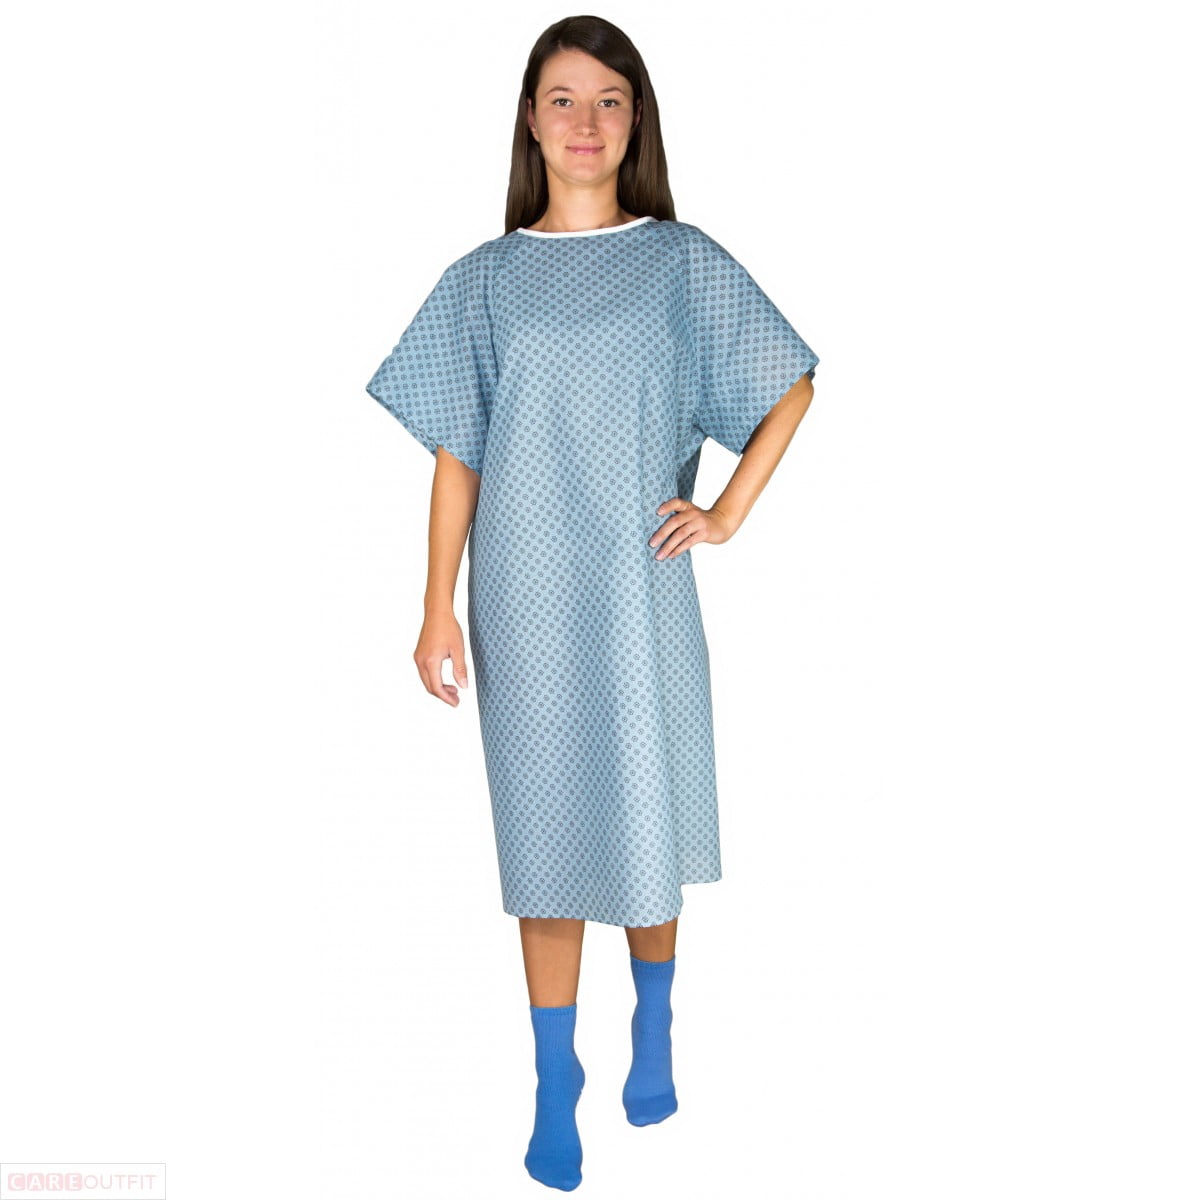 Maxikare Disposable Isolation Gown (Level 3, 80/Case)